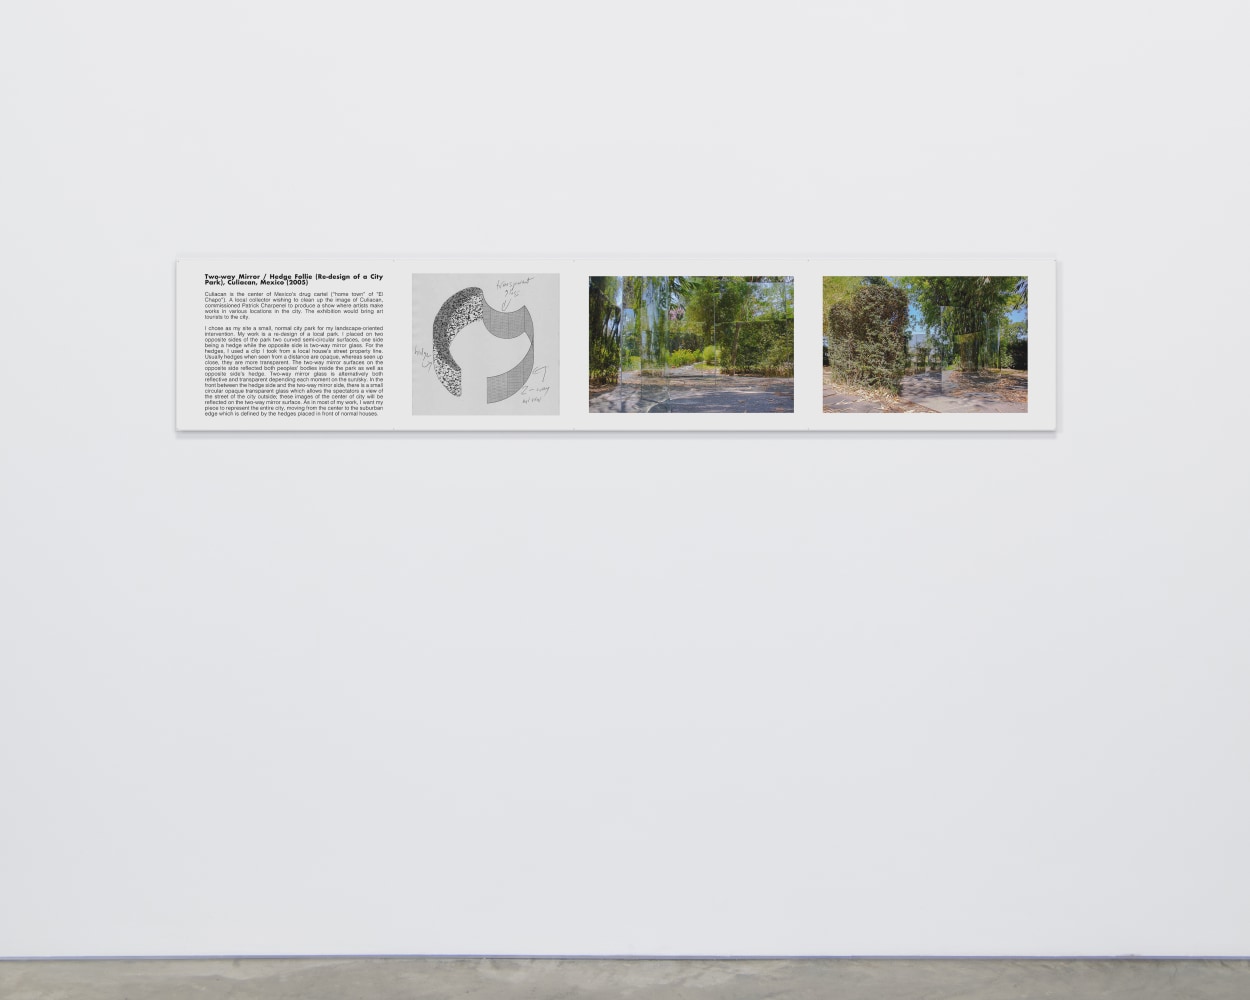 Dan Graham

Two-way Mirror / Hedge Follie (Re-design of a City Park), Culiacan, Mexico

2005 (printed 2021)

Digital inkjet print

15 1/8 x 77 1/2 inches (38.4 x 196.9 cm)

Variation 2 of 5

DG 115

&amp;nbsp;

INQUIRE